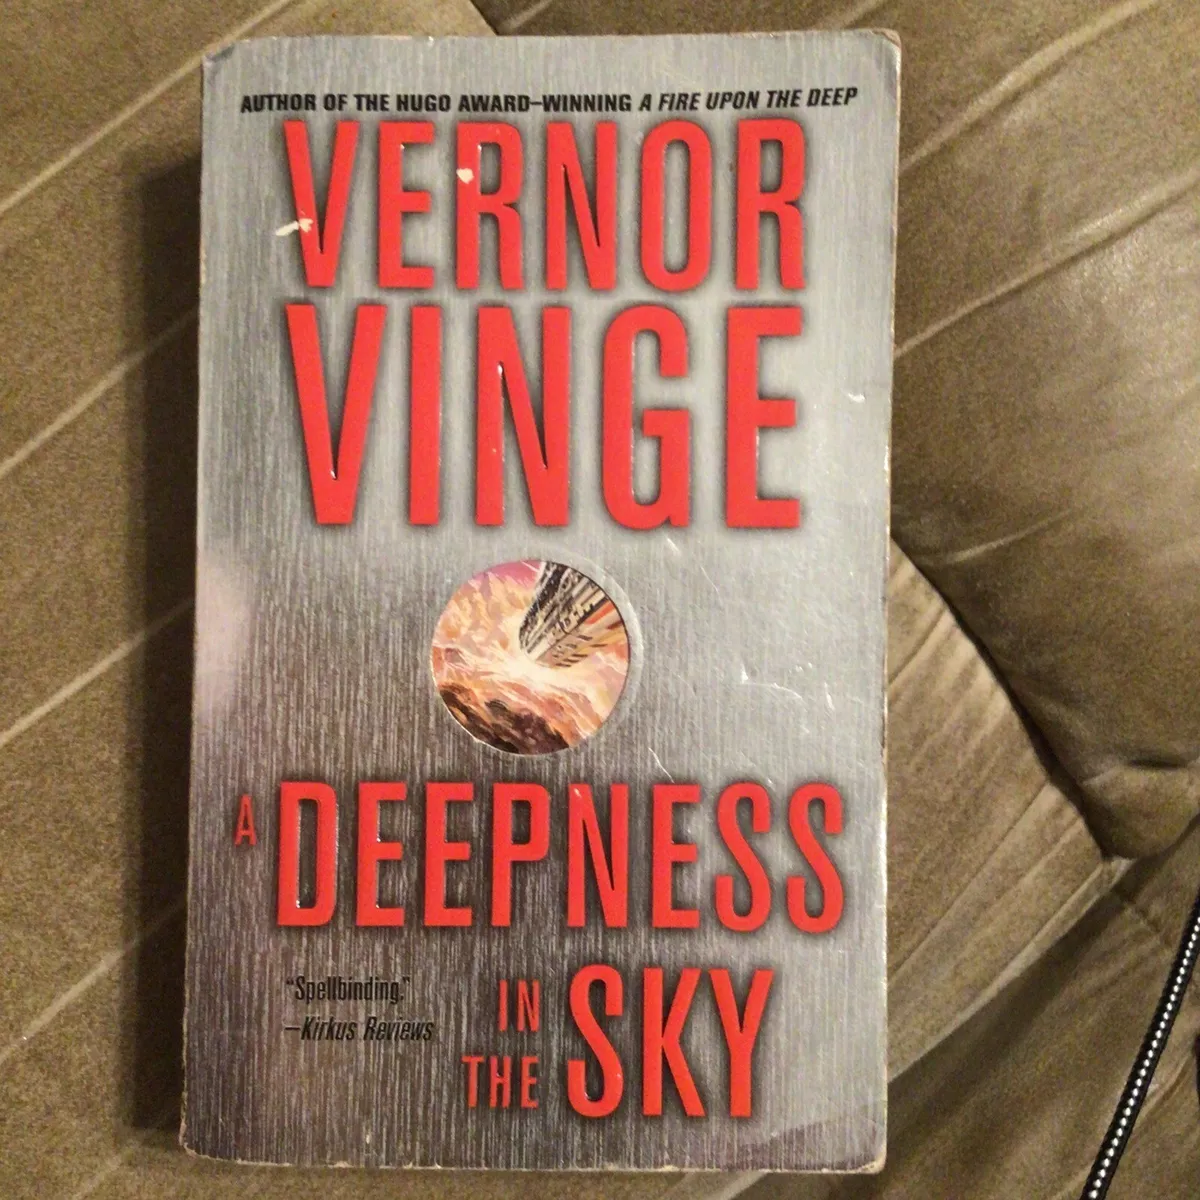 A Deepness in the Sky by Vernor Vinge, Paperback